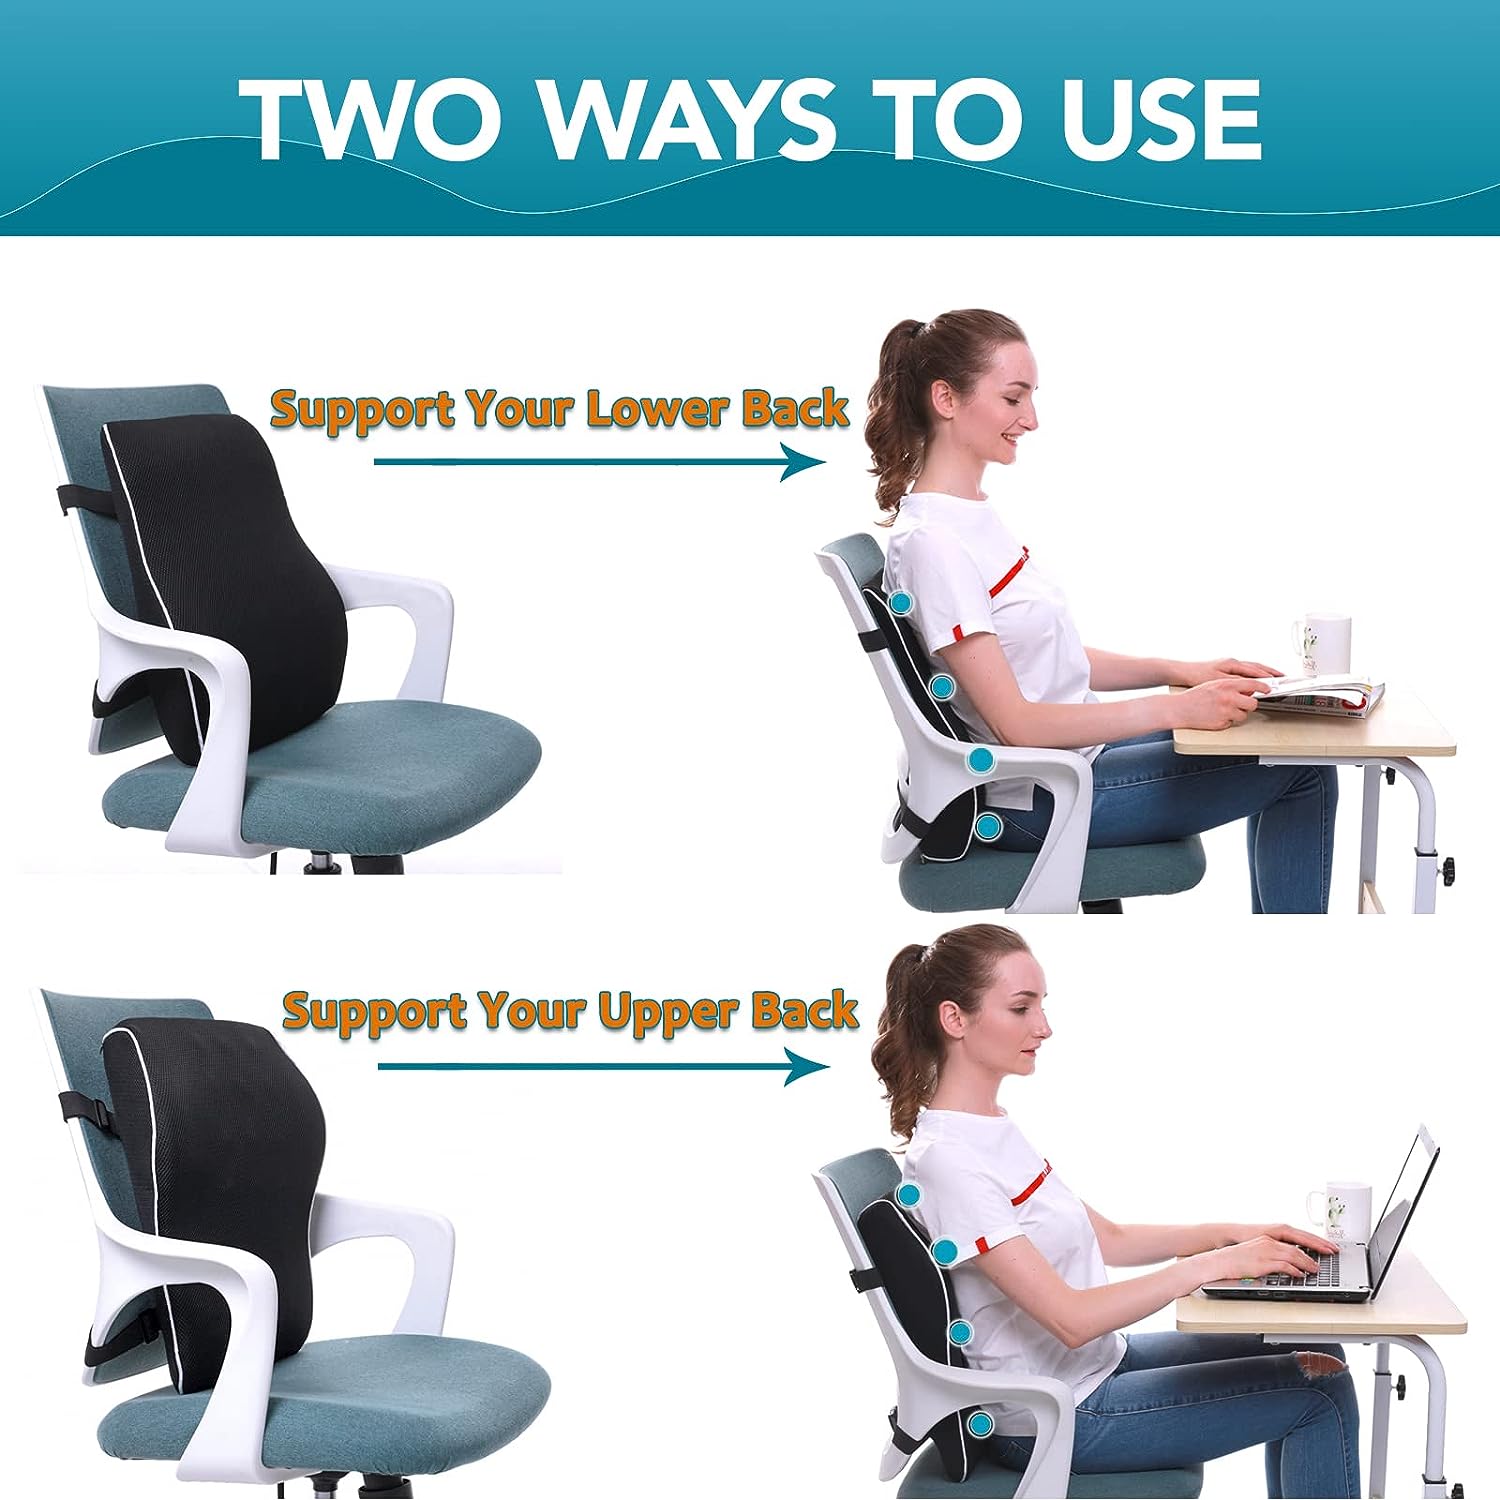 Dual Action Lumbar Support System Special Features